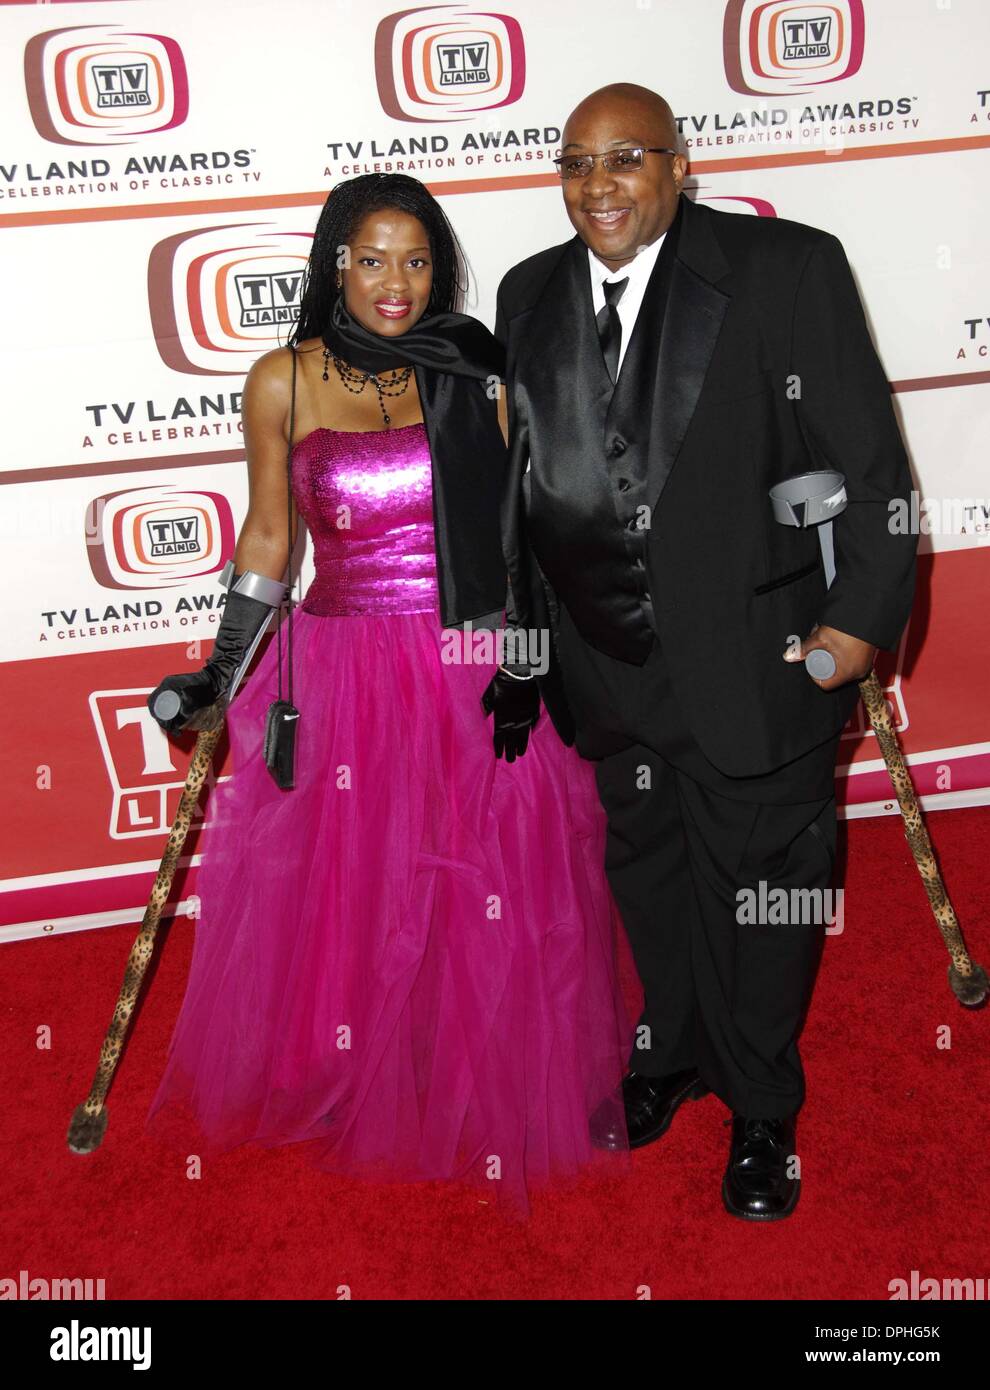 Mar. 19, 2006 - Hollywood, California, U.S. - SANTA MONICA, CA MARCH 19, 2006 (SSI) - -.Actress Danielle Spencer and her guest pose for photographers, during the 2006 TV LAND AWARDS, held at the Barker Hanger, on March 19, 2006, in Santa Monica, California.   / Super Star Images.  -   K47283MG(Credit Image: © Michael Germana/Globe Photos/ZUMAPRESS.com) Stock Photo